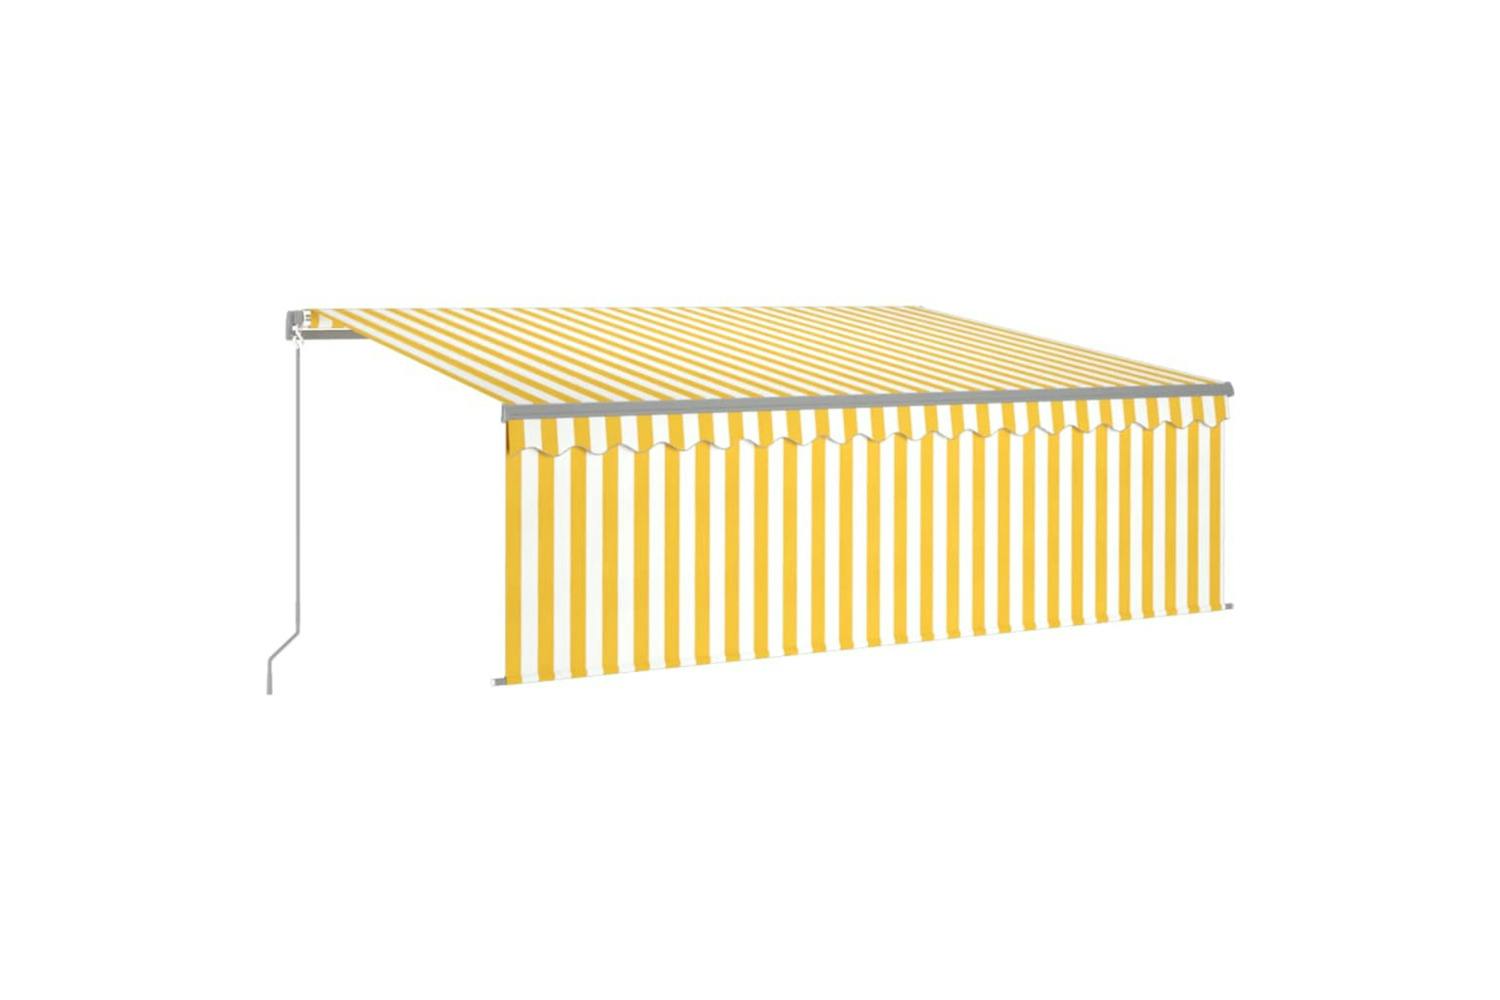 Vidaxl 3069418 Manual Retractable Awning With Blind 4x3m Yellow&white